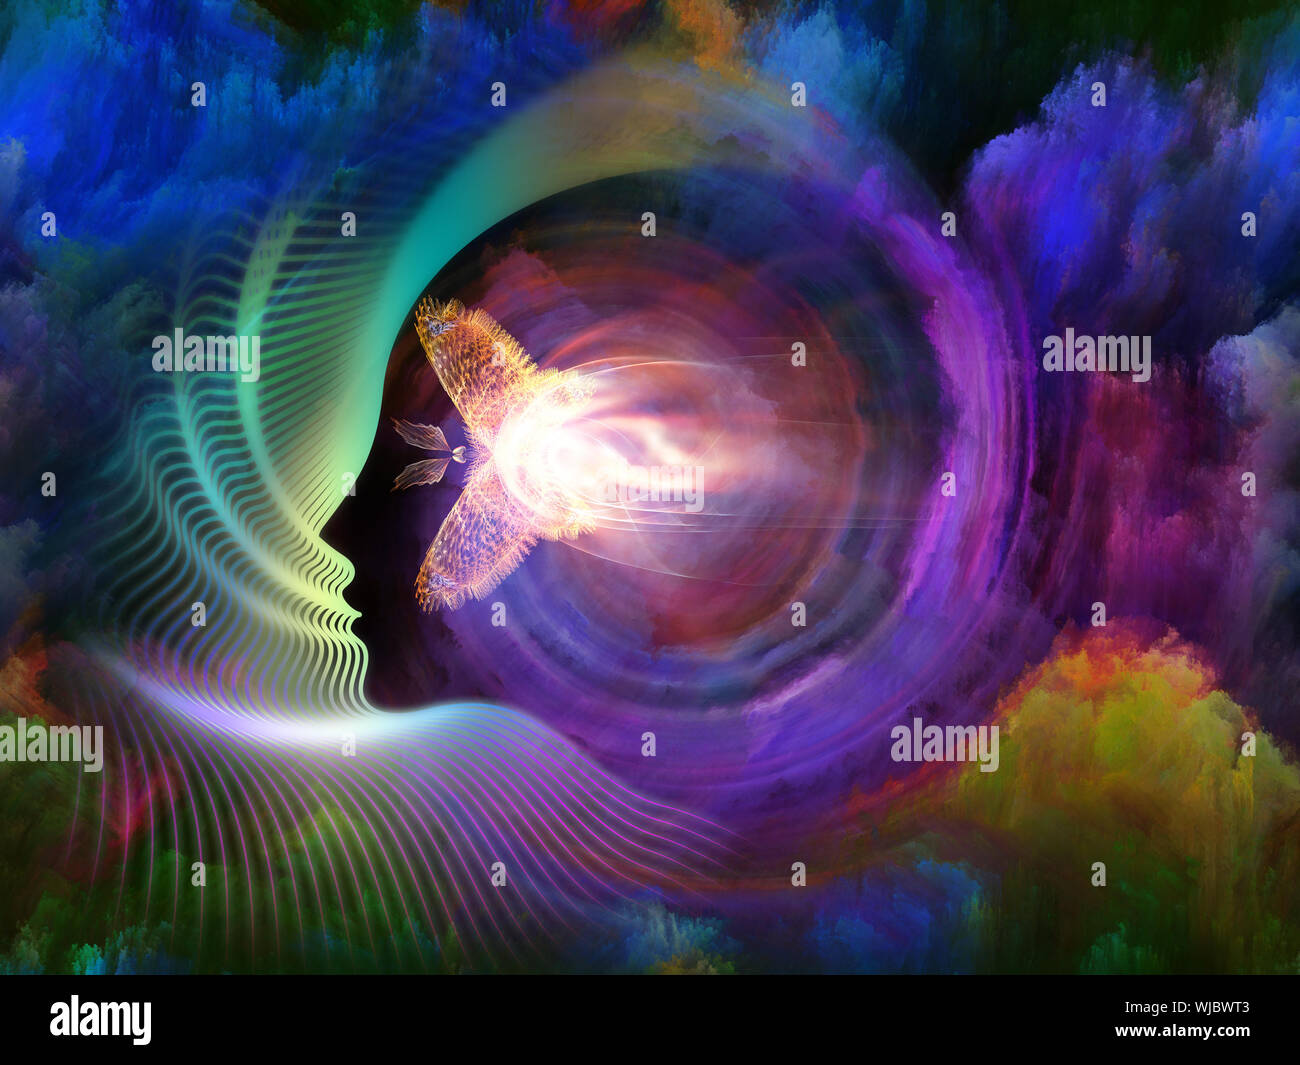 Geometry Of The Soul Series Two Background Design Of Human Profile And Abstract Elements On The Subject Of Spirituality Science Creativity And Huma Stock Photo Alamy